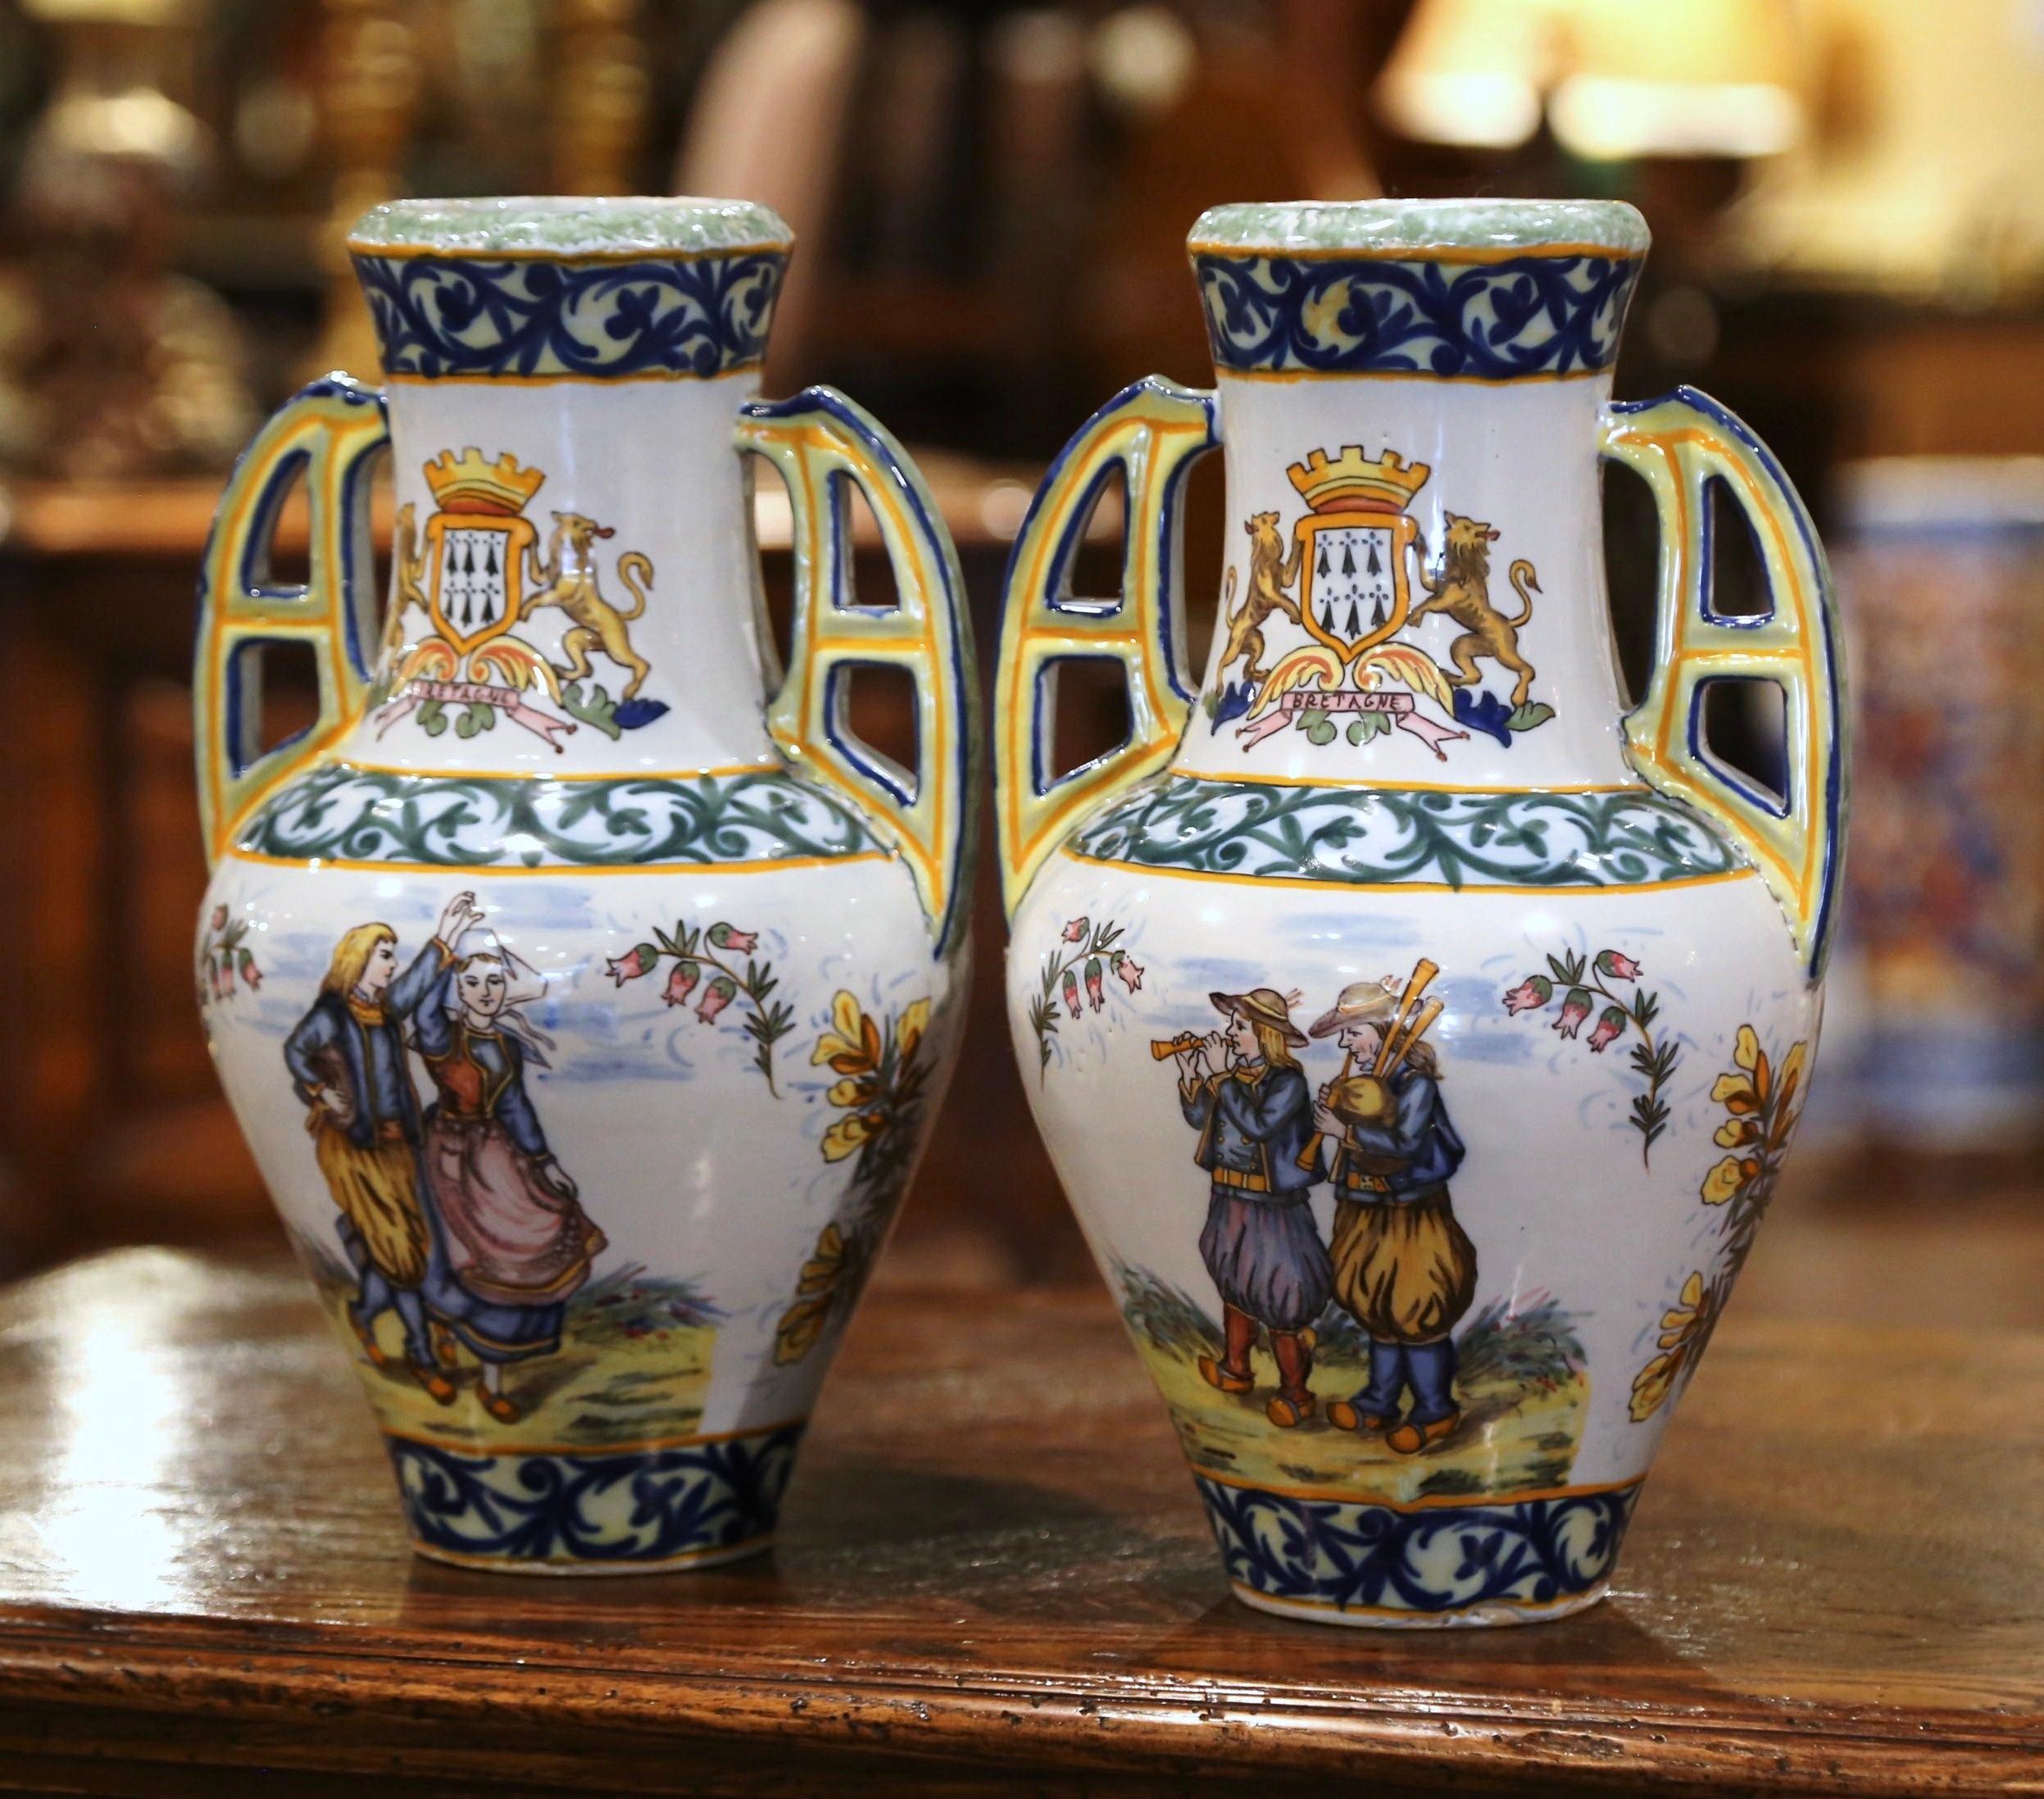 Decorate a mantel or table with this colorful pair of antique faience vases. Crafted in Brittany, France, circa 1890, both hand painted vases with side handles show Britons people dressed in traditional outfits on one side, and the Brittany coat of